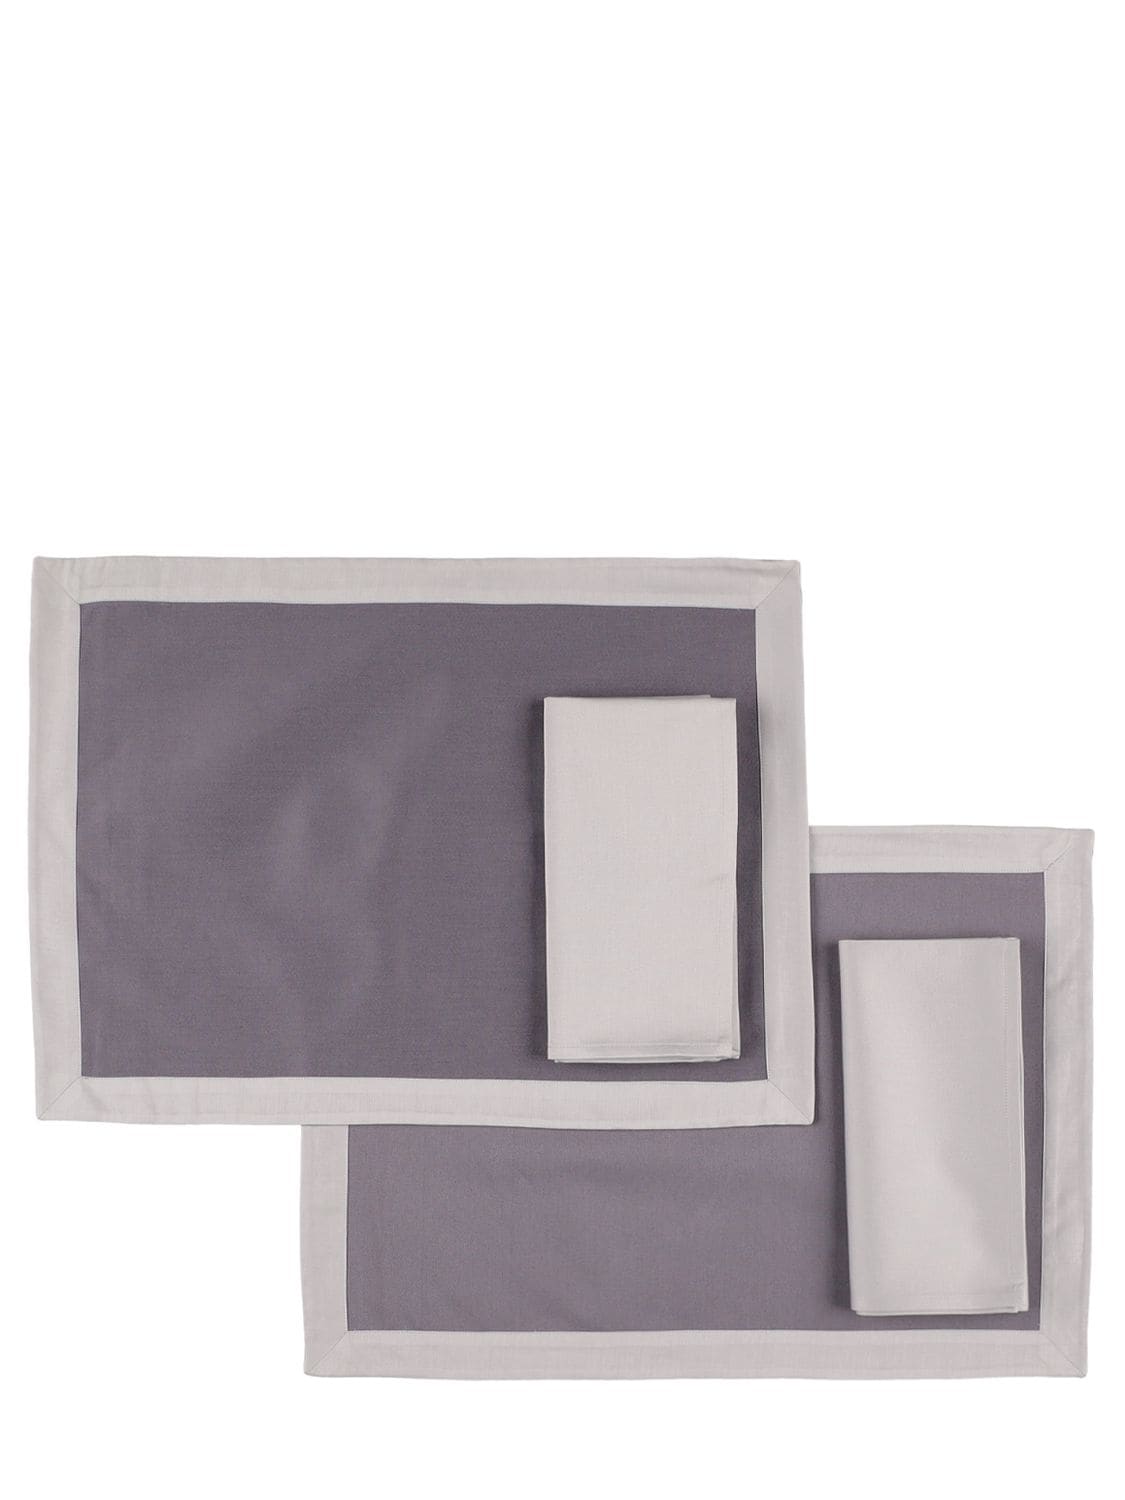 Alessandro Di Marco Set Of 2 Placemats & Napkins In Grey